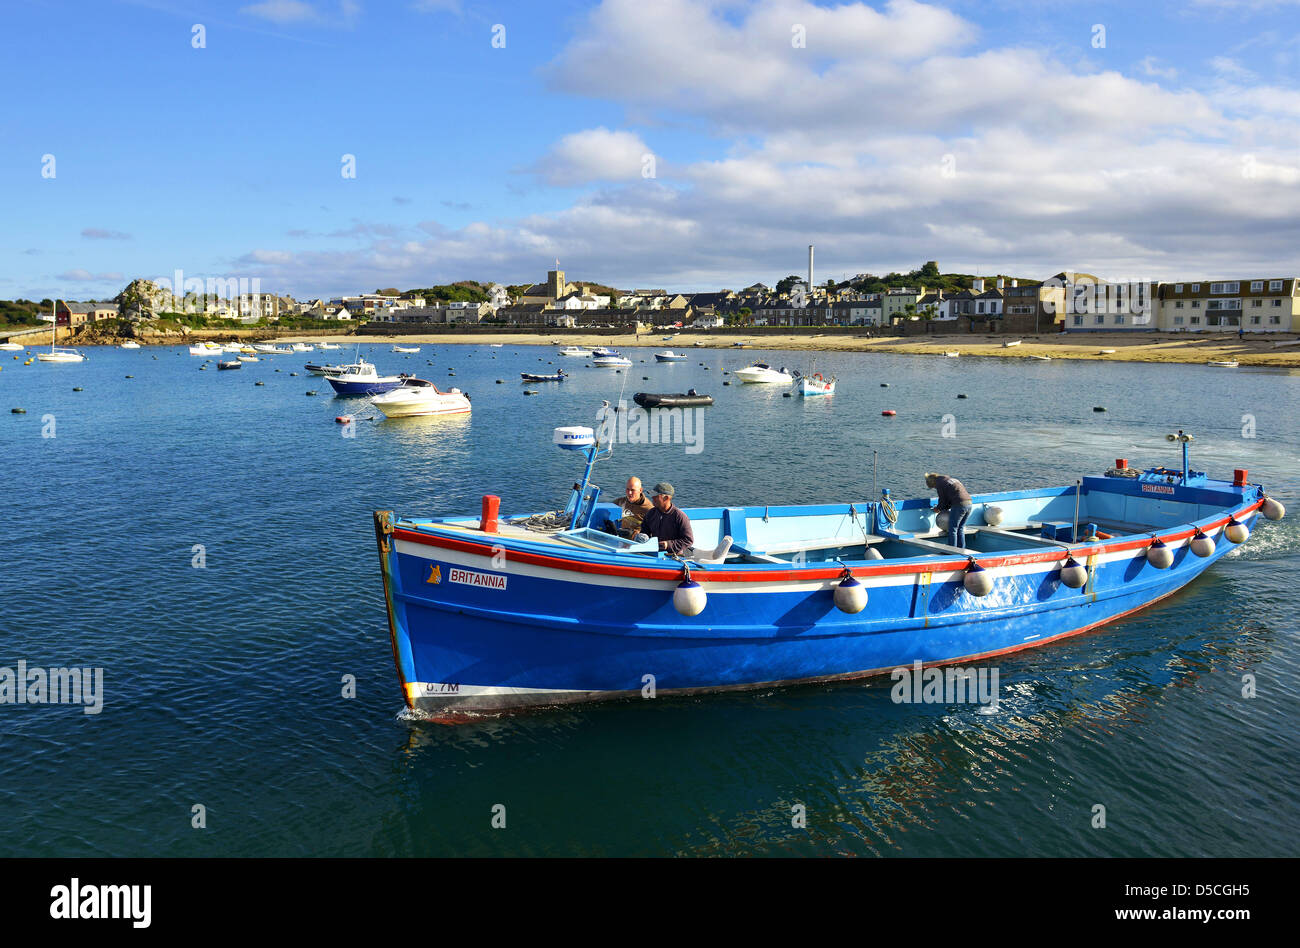 The harbour and beach at Hugh Town, St Mary's, Isles of Scilly, Britain. Stock Photo